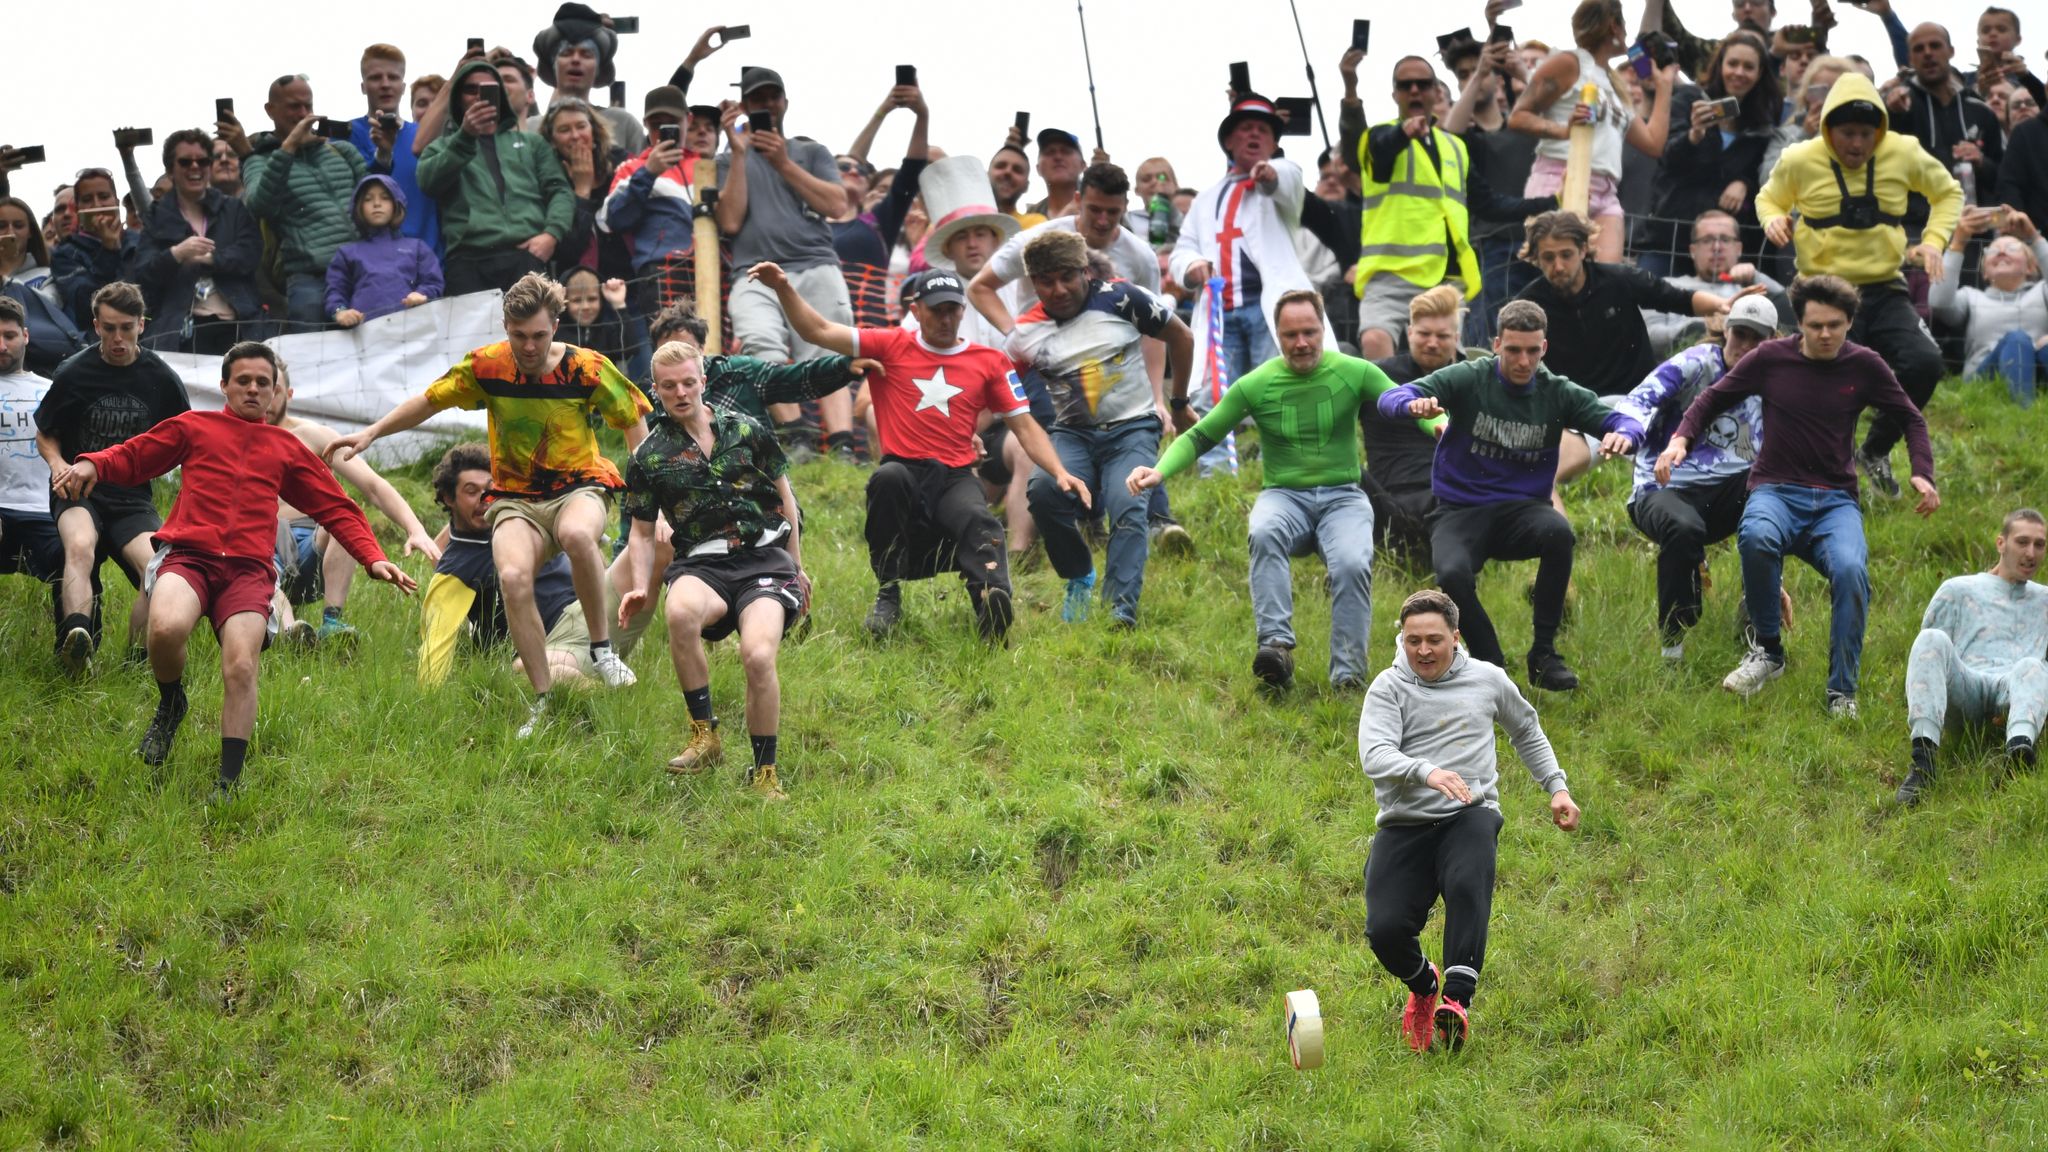 Thrill-seeking daredevils take part in annual cheese-rolling race | News | Sky News